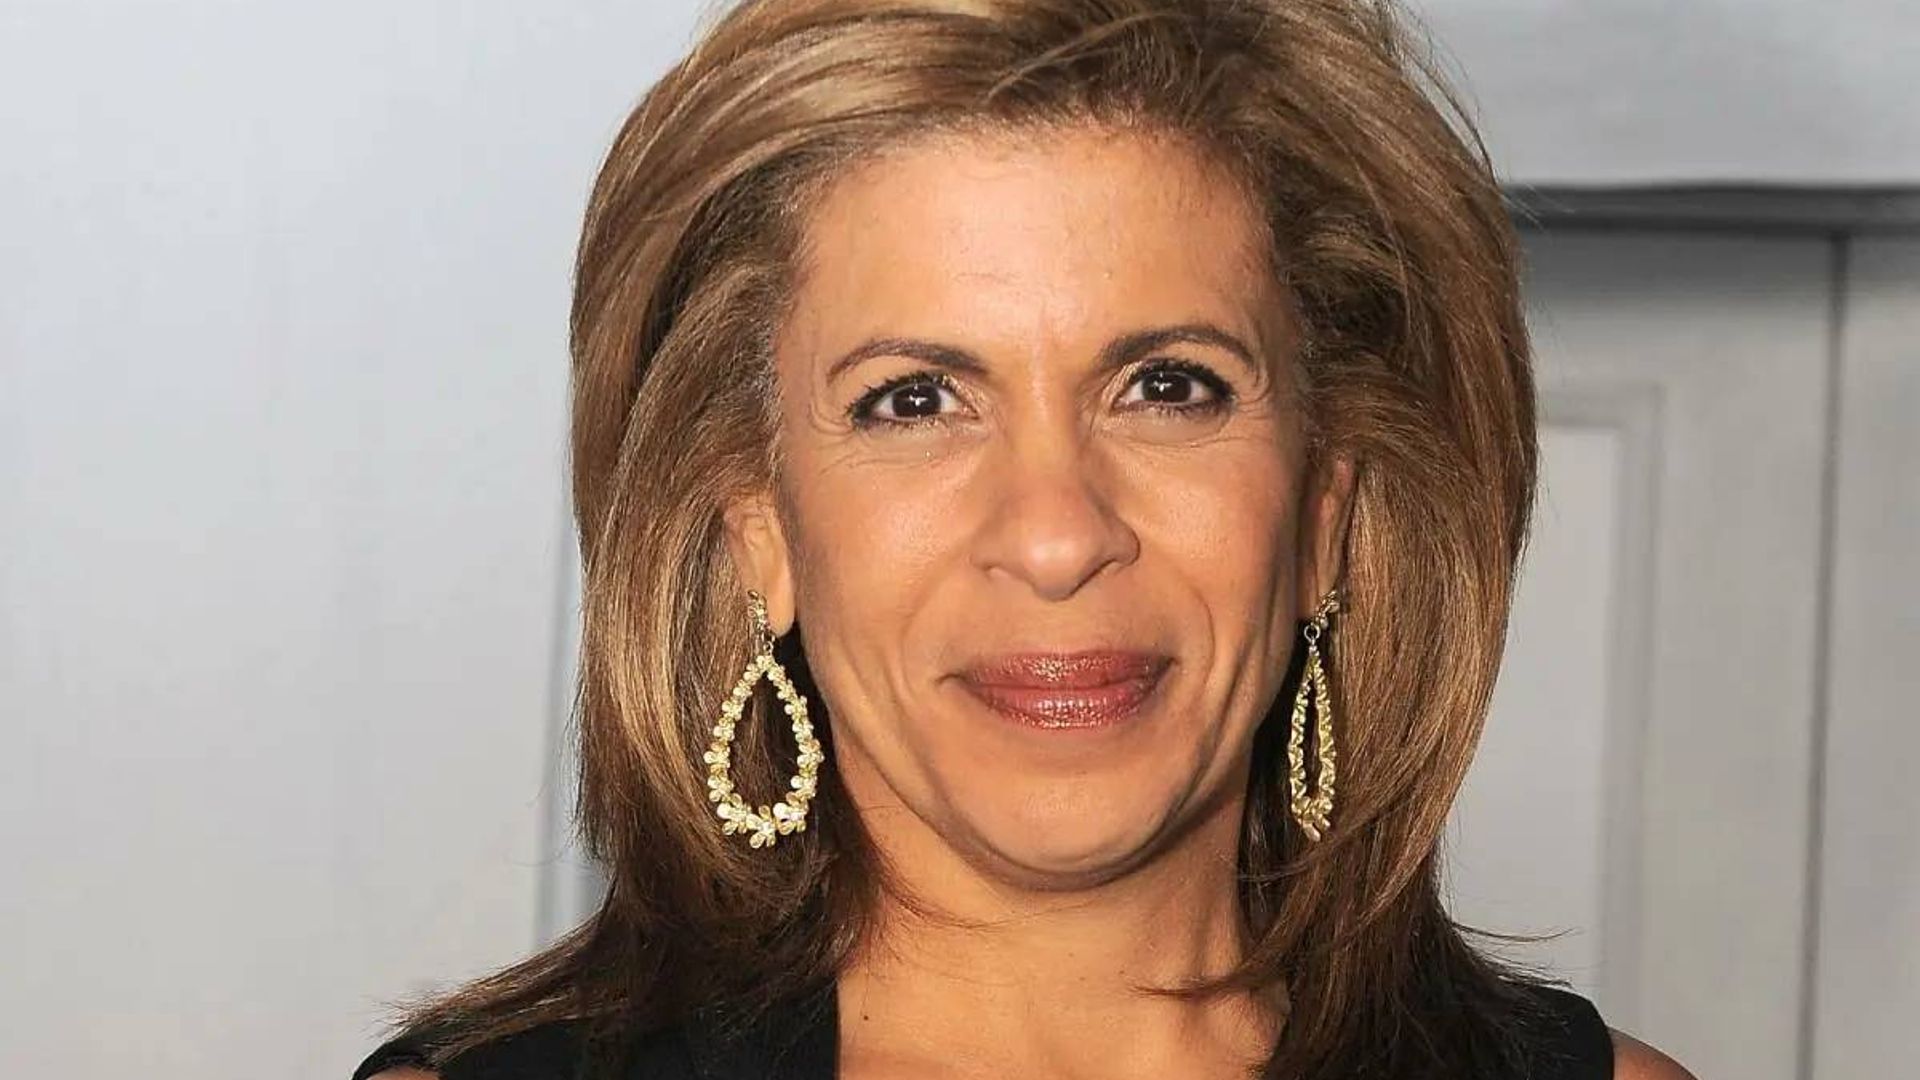 Hoda Kotb's fans worry for her daughters and fiancé amid health struggle